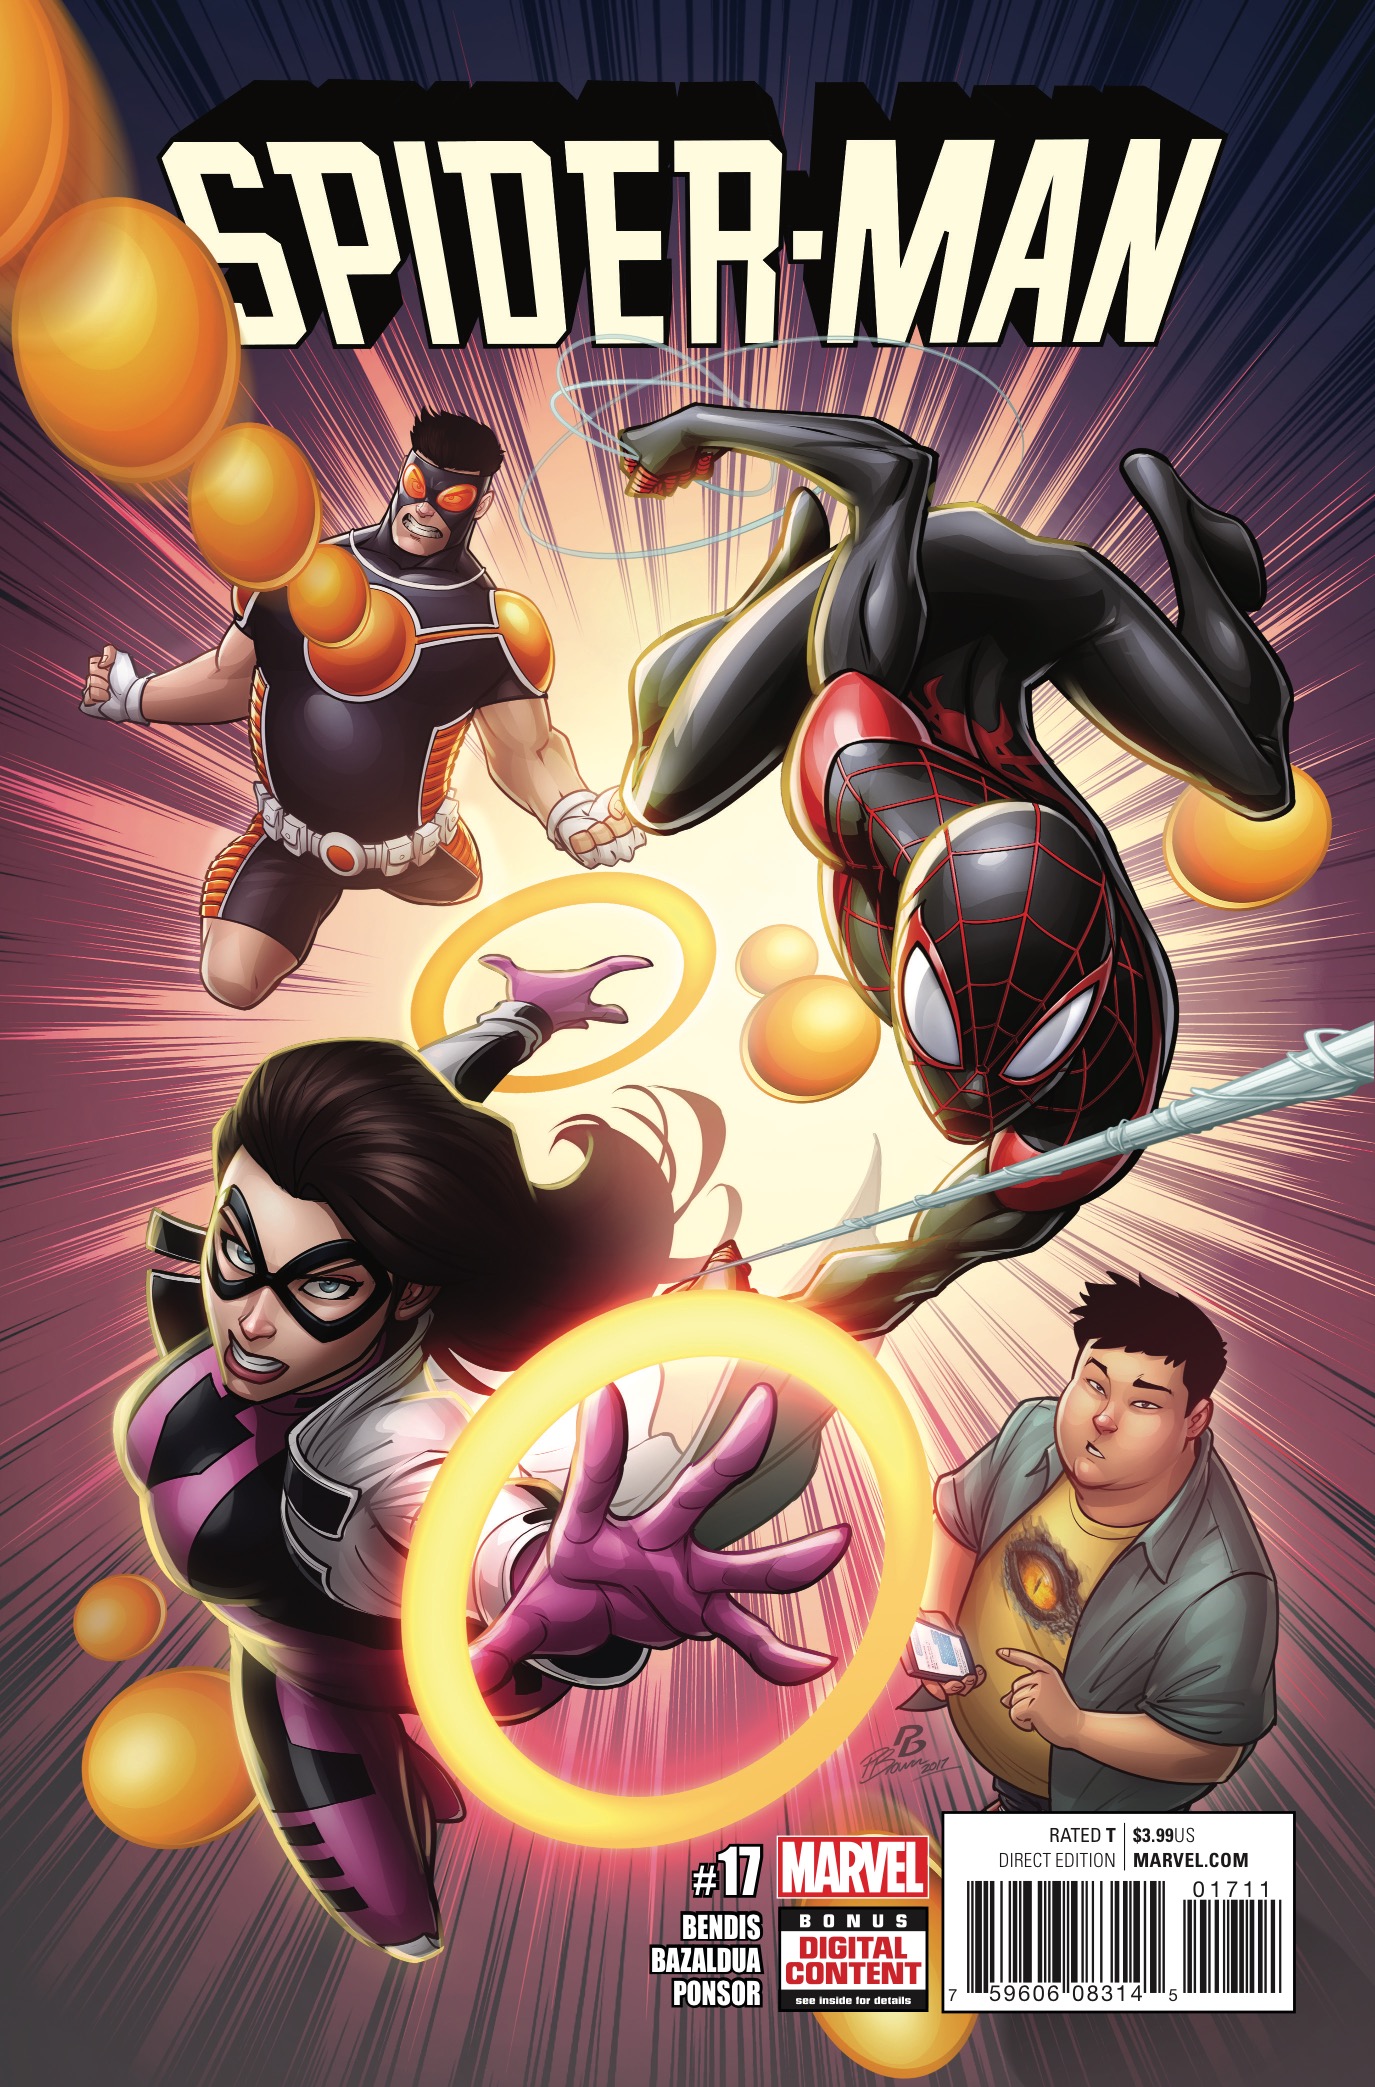 Spider-Man #17 Review